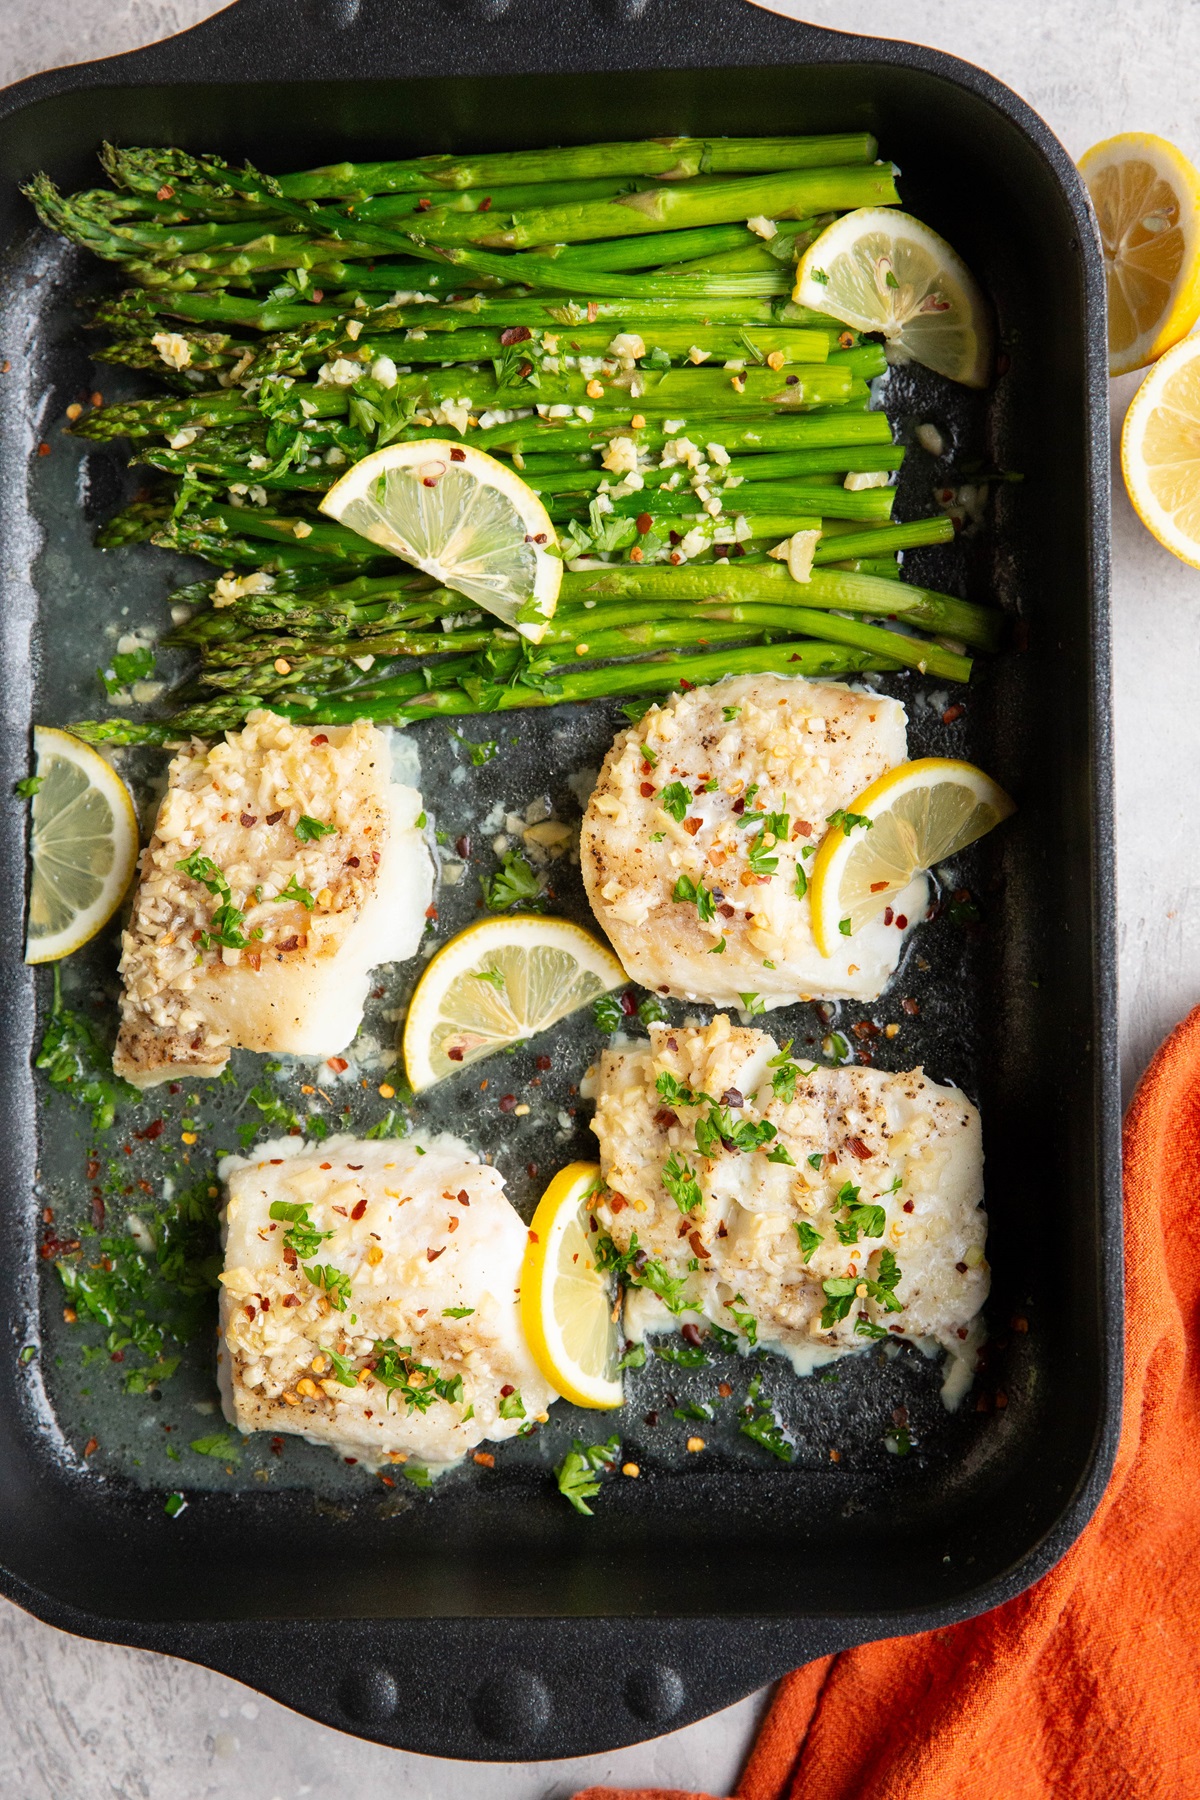 Garlic butter cod in a casserole dish with roasted asparagus and lemon slices. A red napkin to the side.